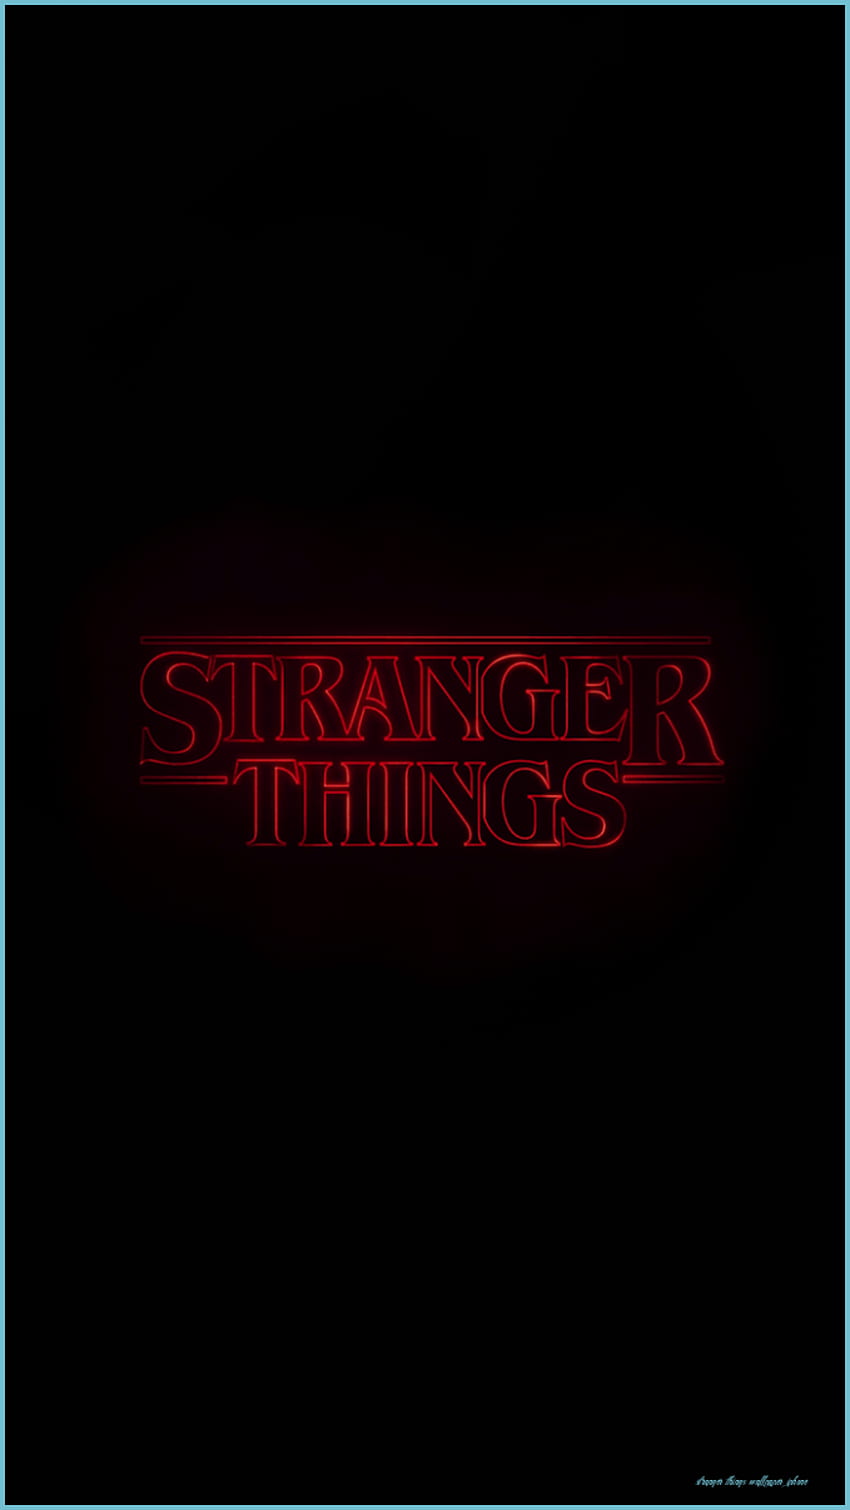 Stranger Things HD Wallpapers, 1000+ Free Stranger Things Wallpaper Images  For All Devices